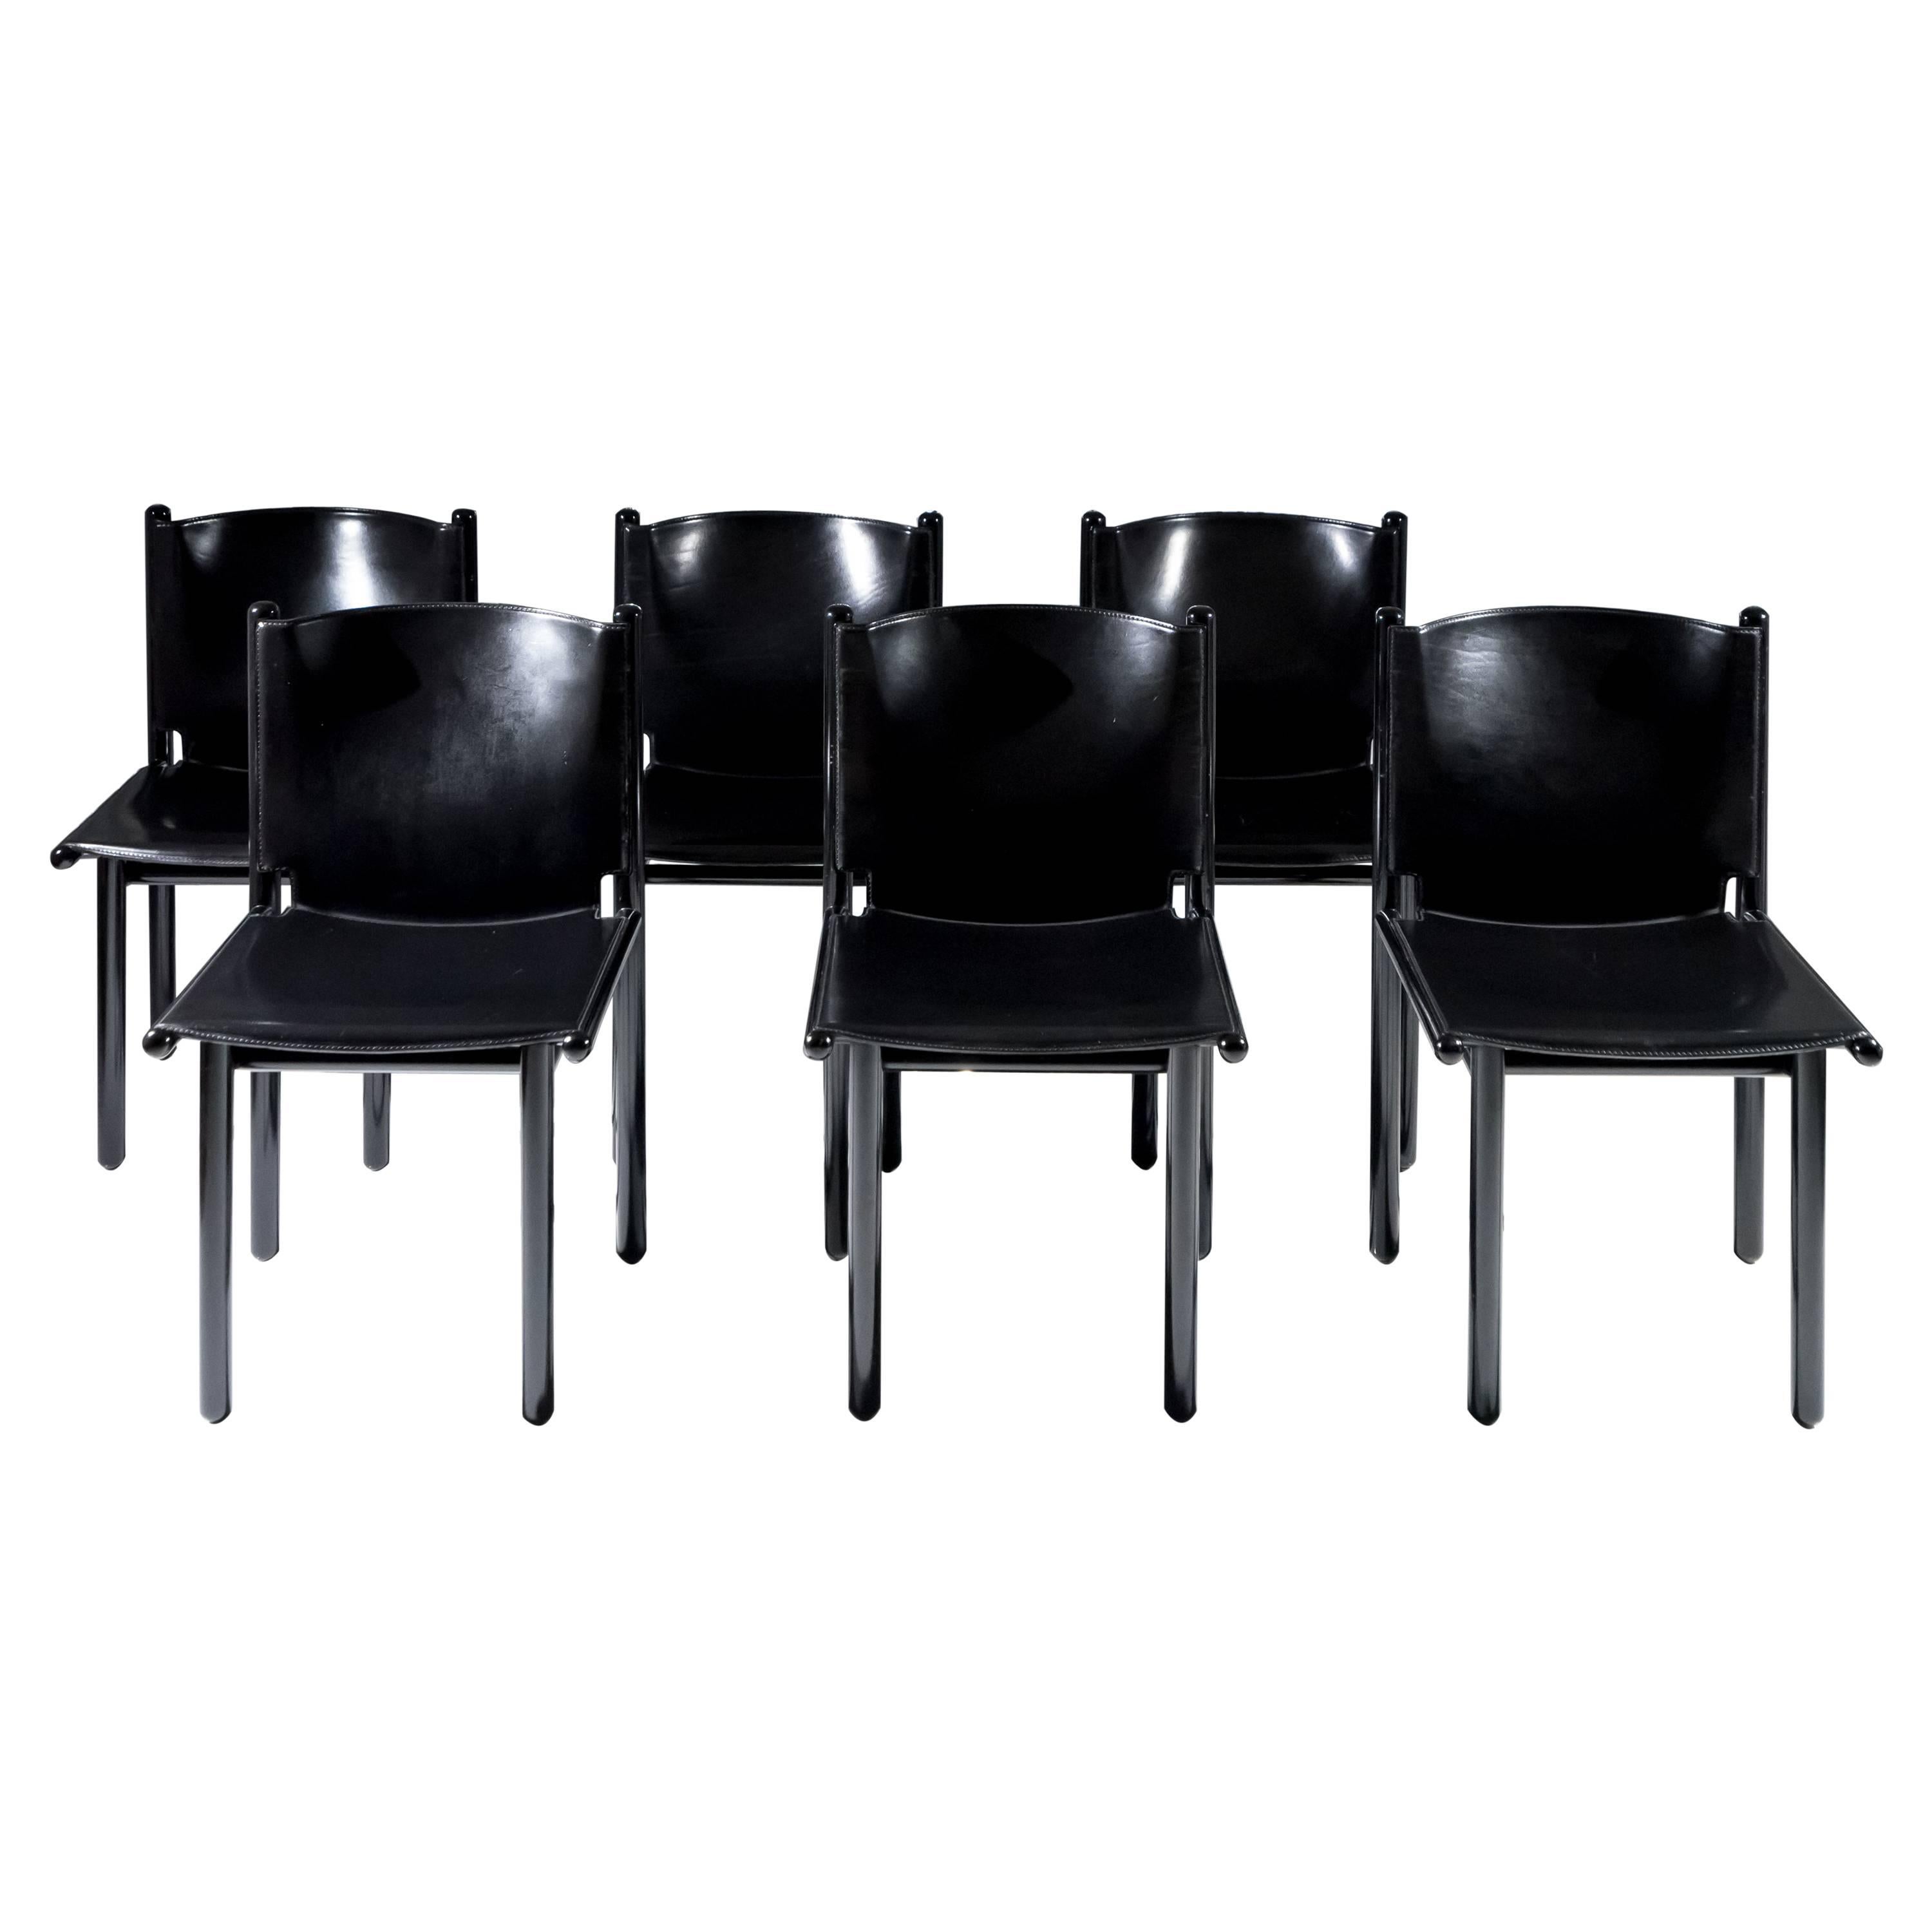 Six Black Lacquer & Leather 'Caprile' Chairs by G.F. Frattini for Cassina, 1985